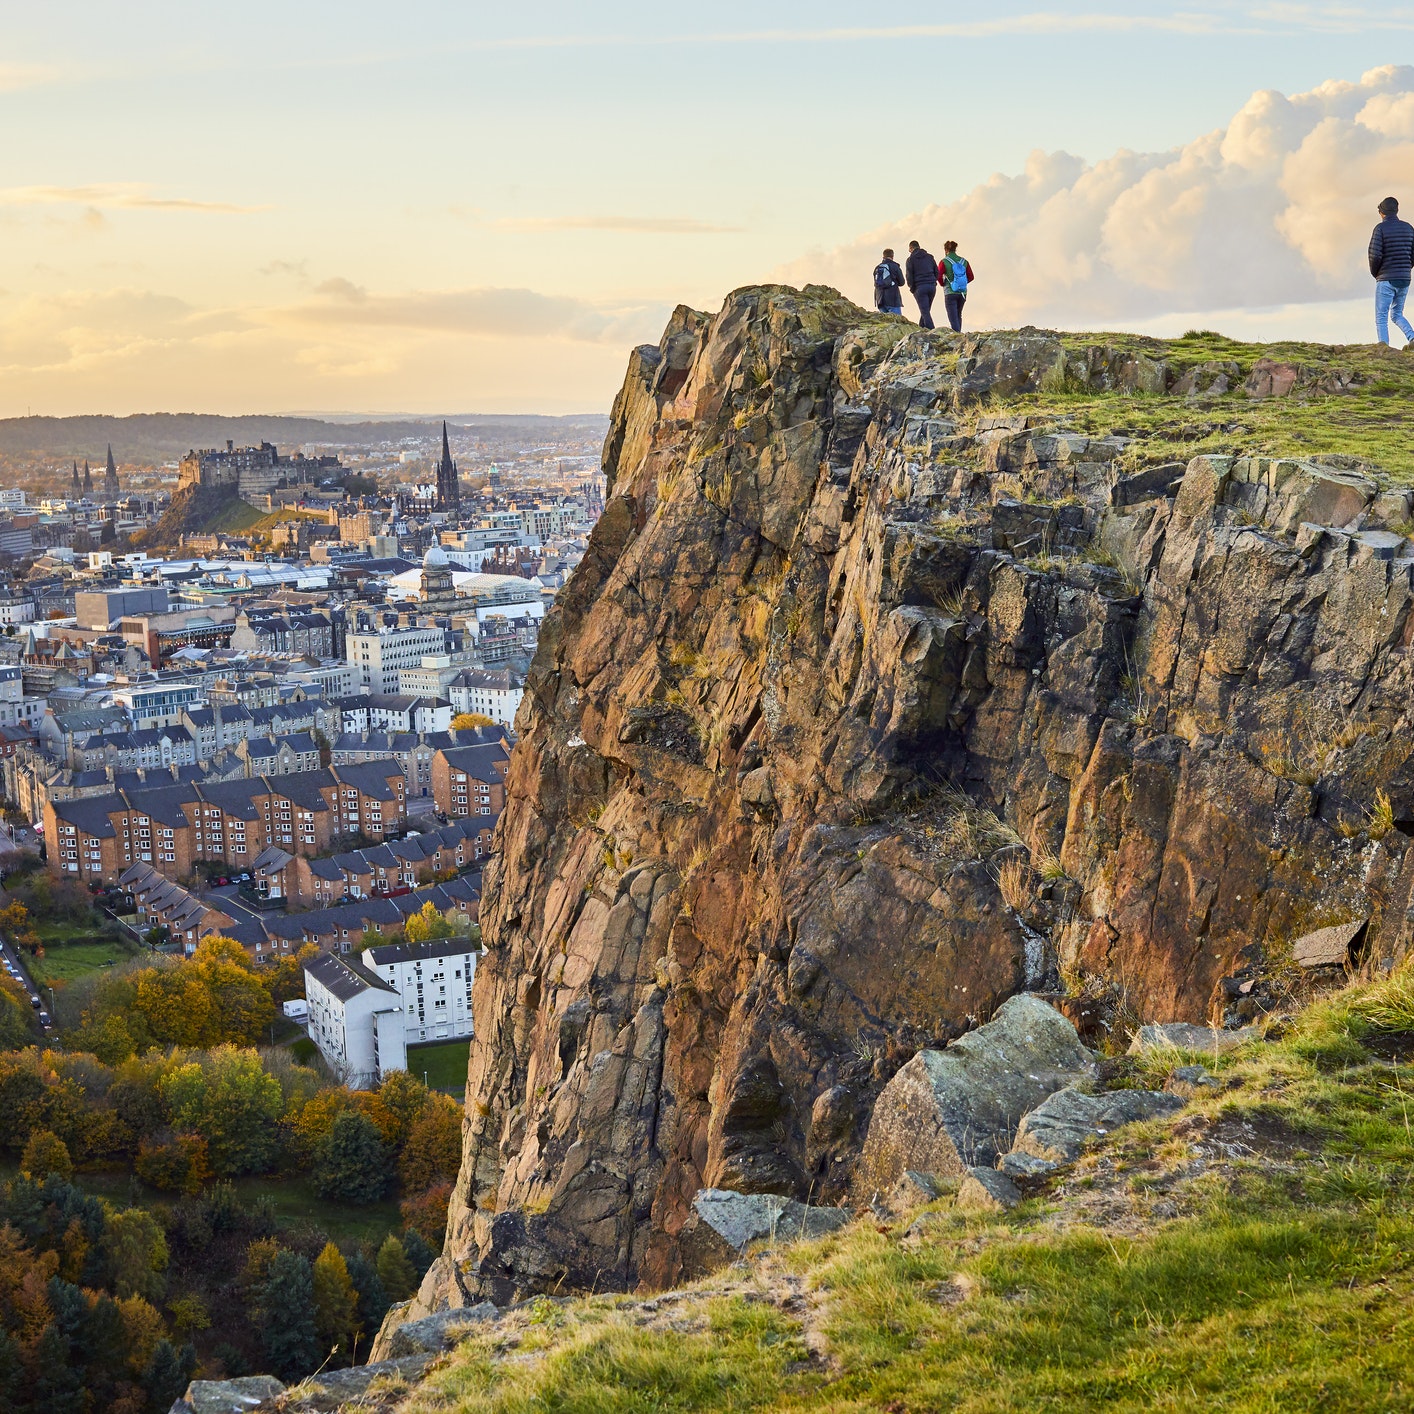 Group of people walking along cliff edge looking at city views. Edinburgh Castle in the distance